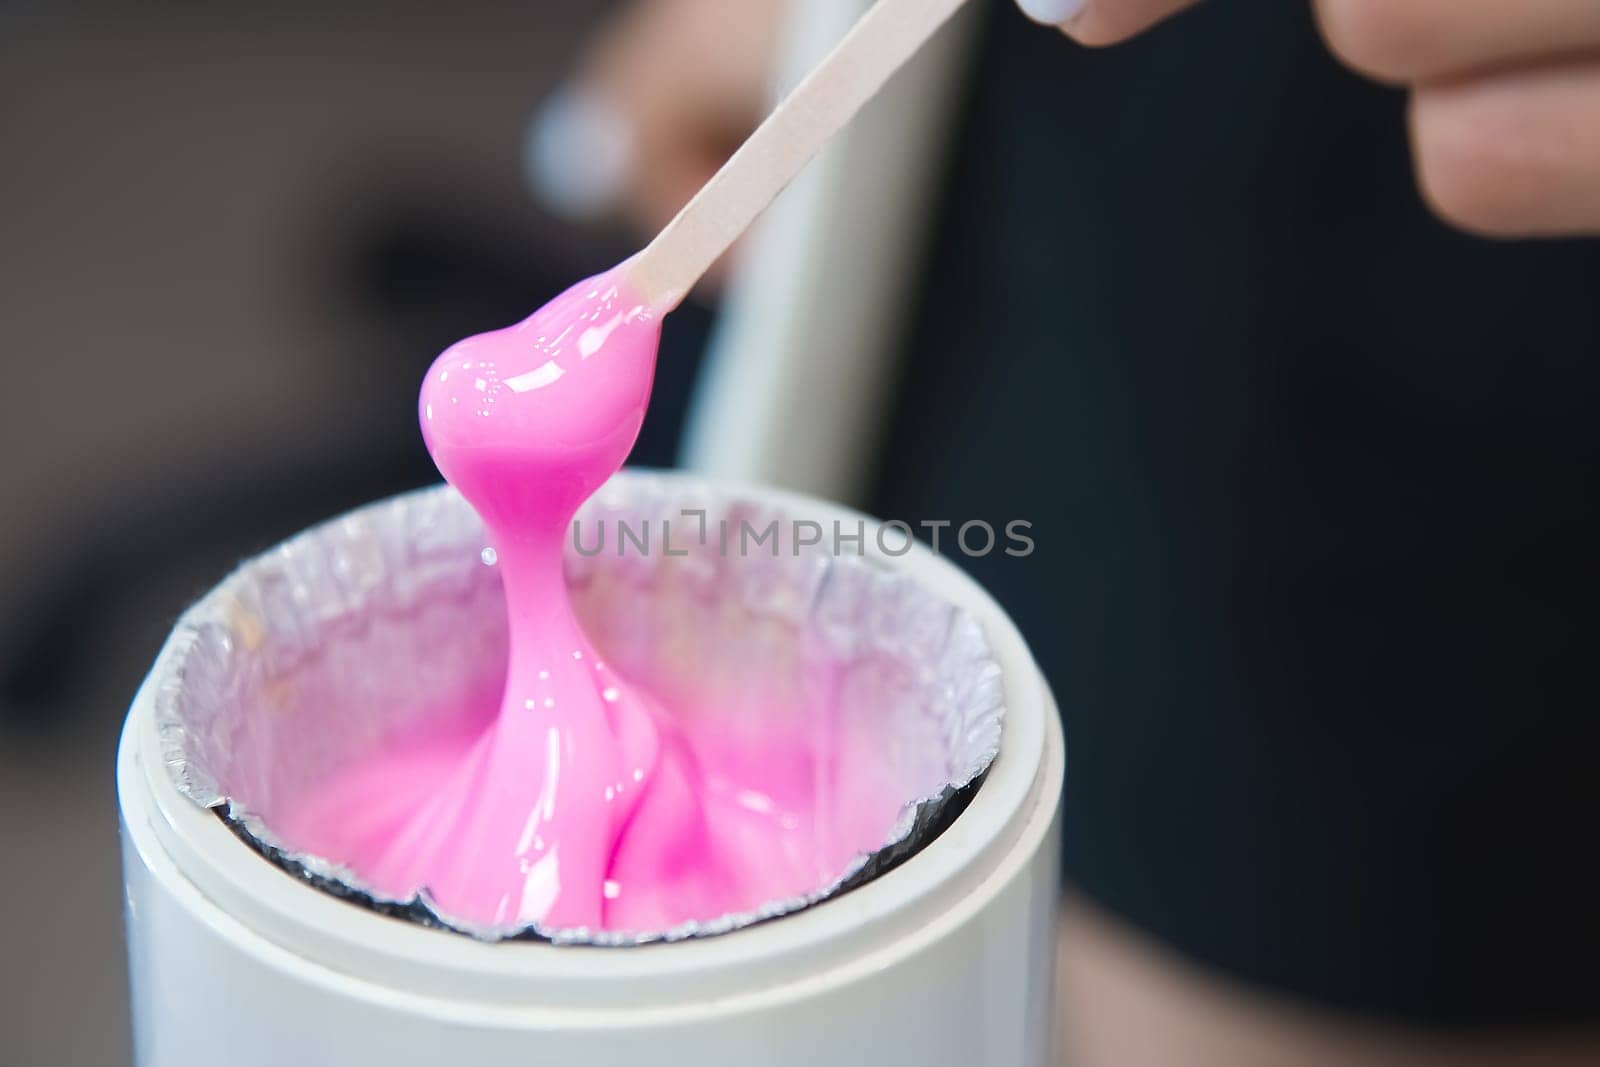 depilation and beauty, sugar paste or wax for hair removal. Preparation of pink wax for sugaring. Close-up of sugar paste or wax honey for hair removal using a wooden wax spatula by yanik88